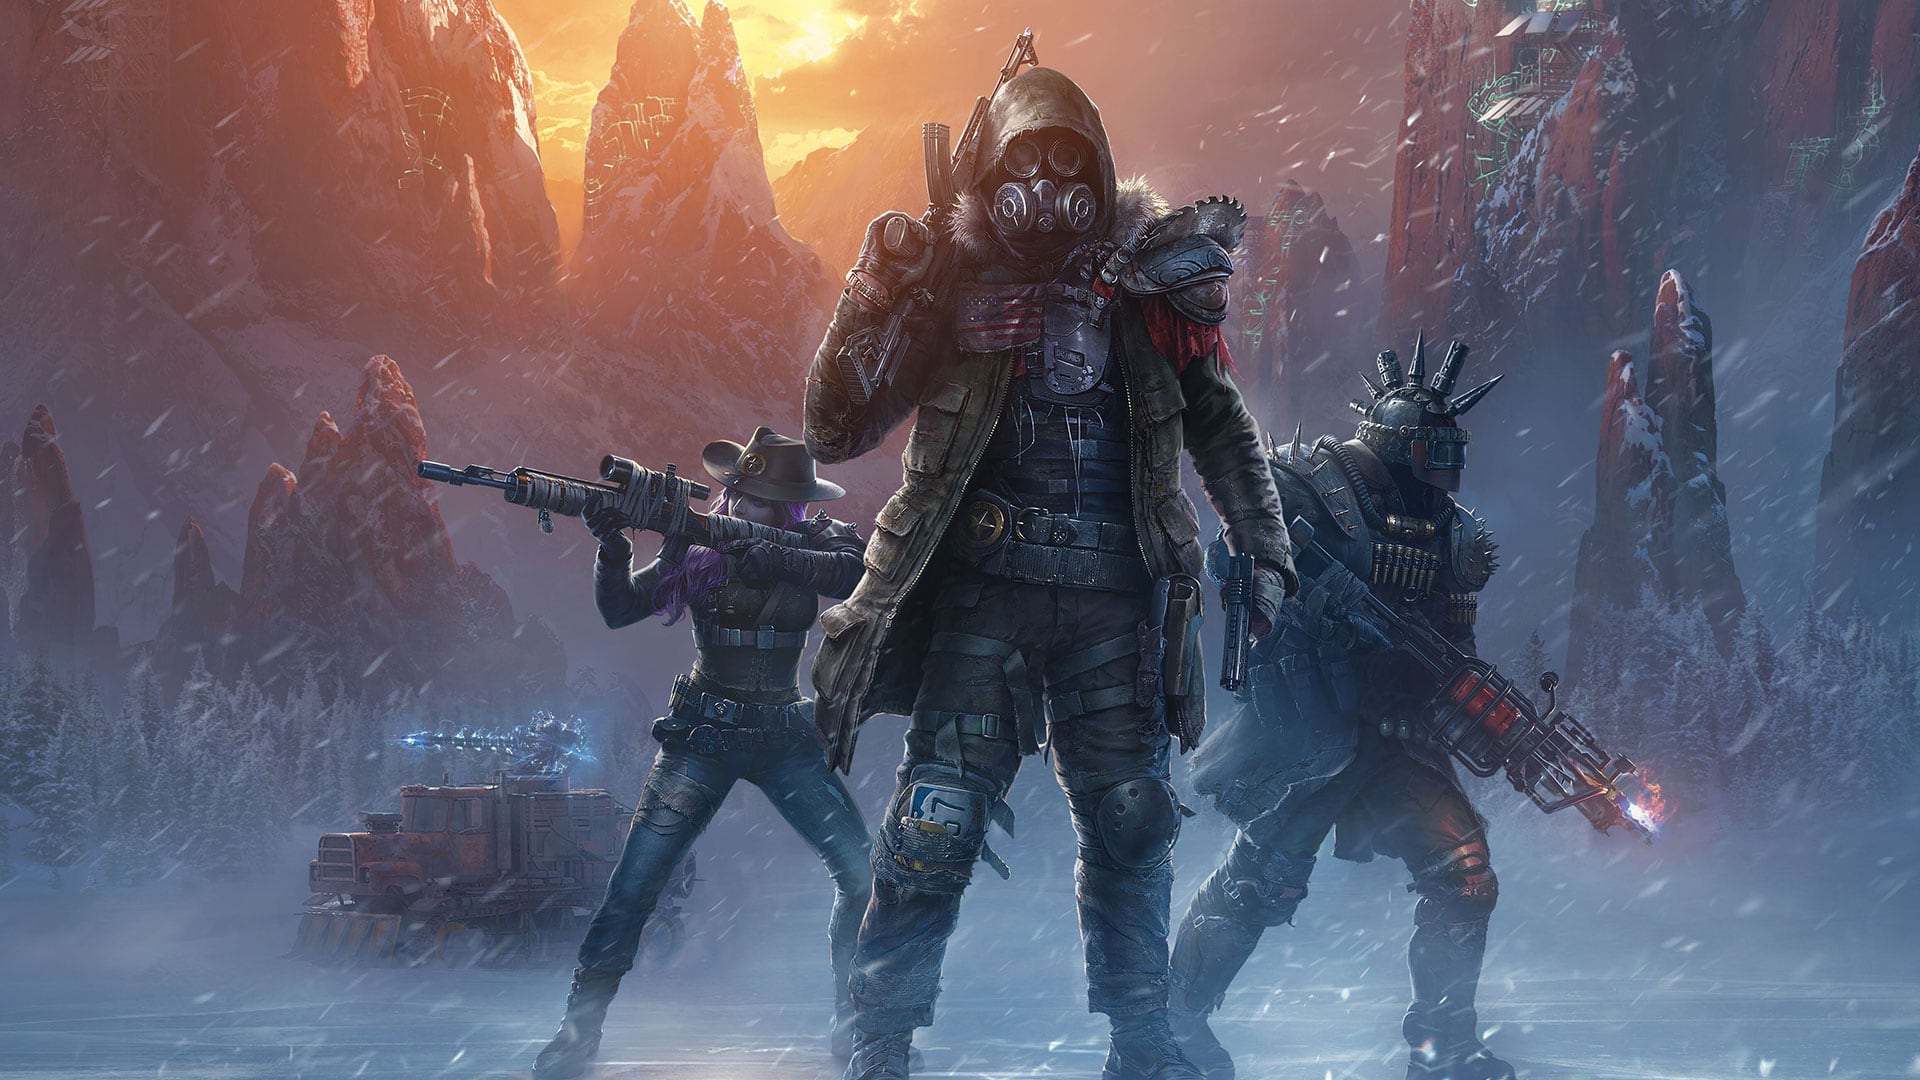 Wasteland 3 Release Date, Gameplay, Maps Coronavirus Pandemic has Delayed the Title Launch